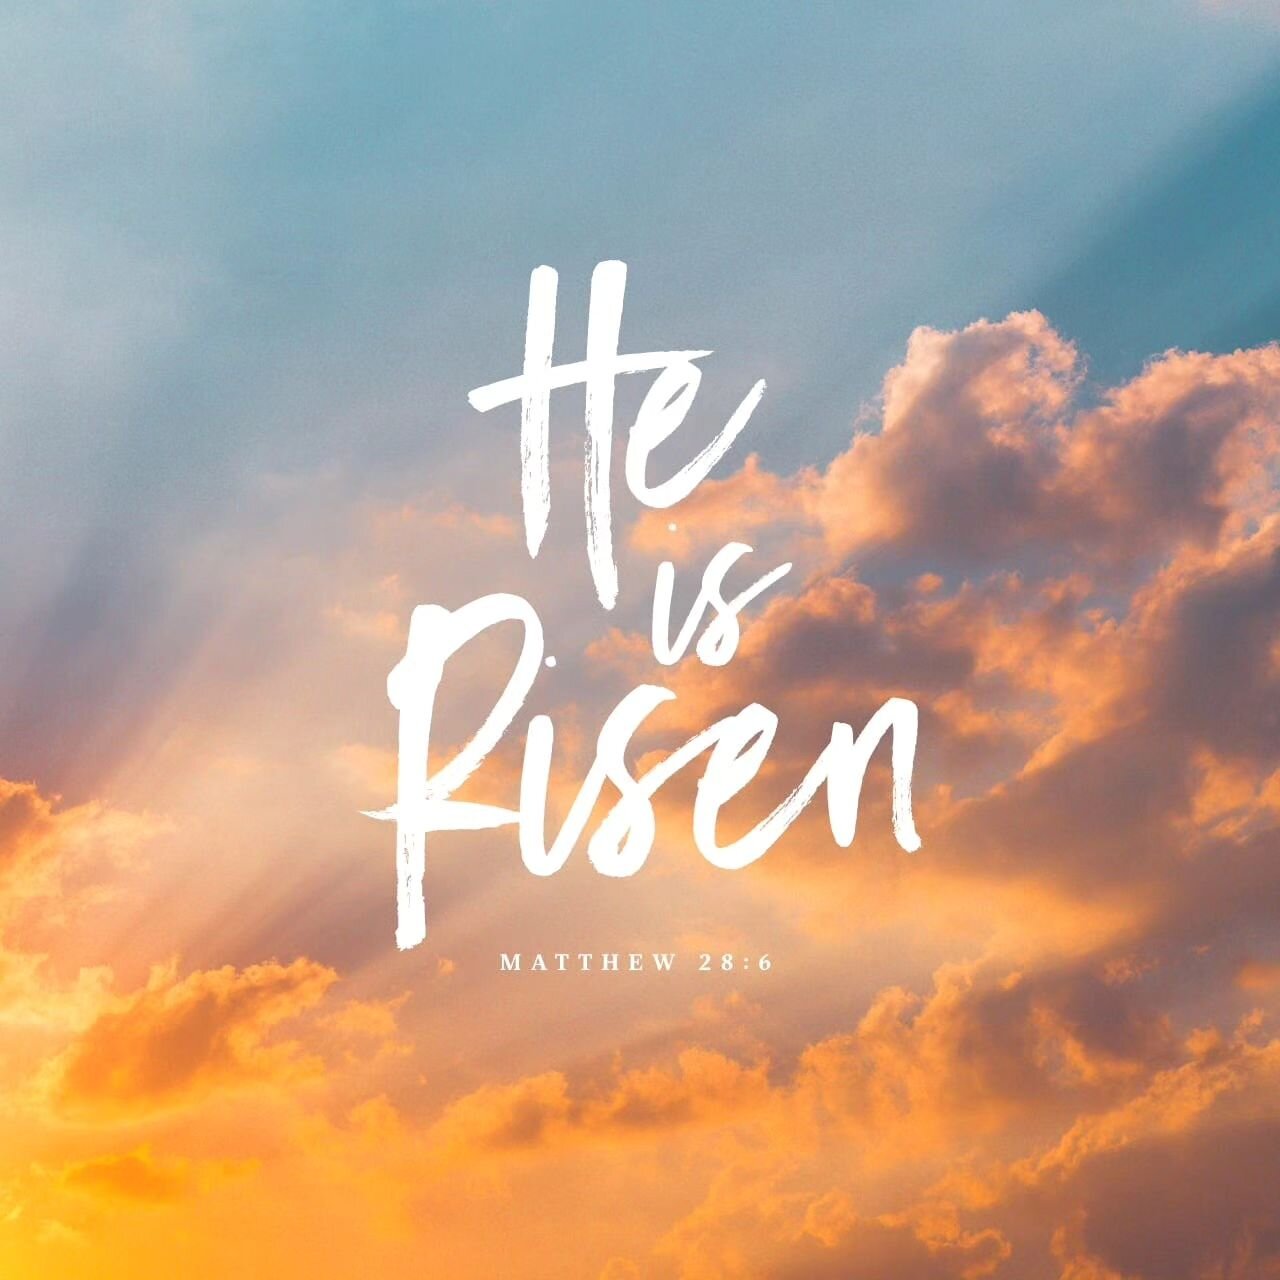 Happy Resurrection Sunday!! Let's remember the reason for the season.✨️👑💒

#happyresurrectionday✝️ #happyeaster #hegotup